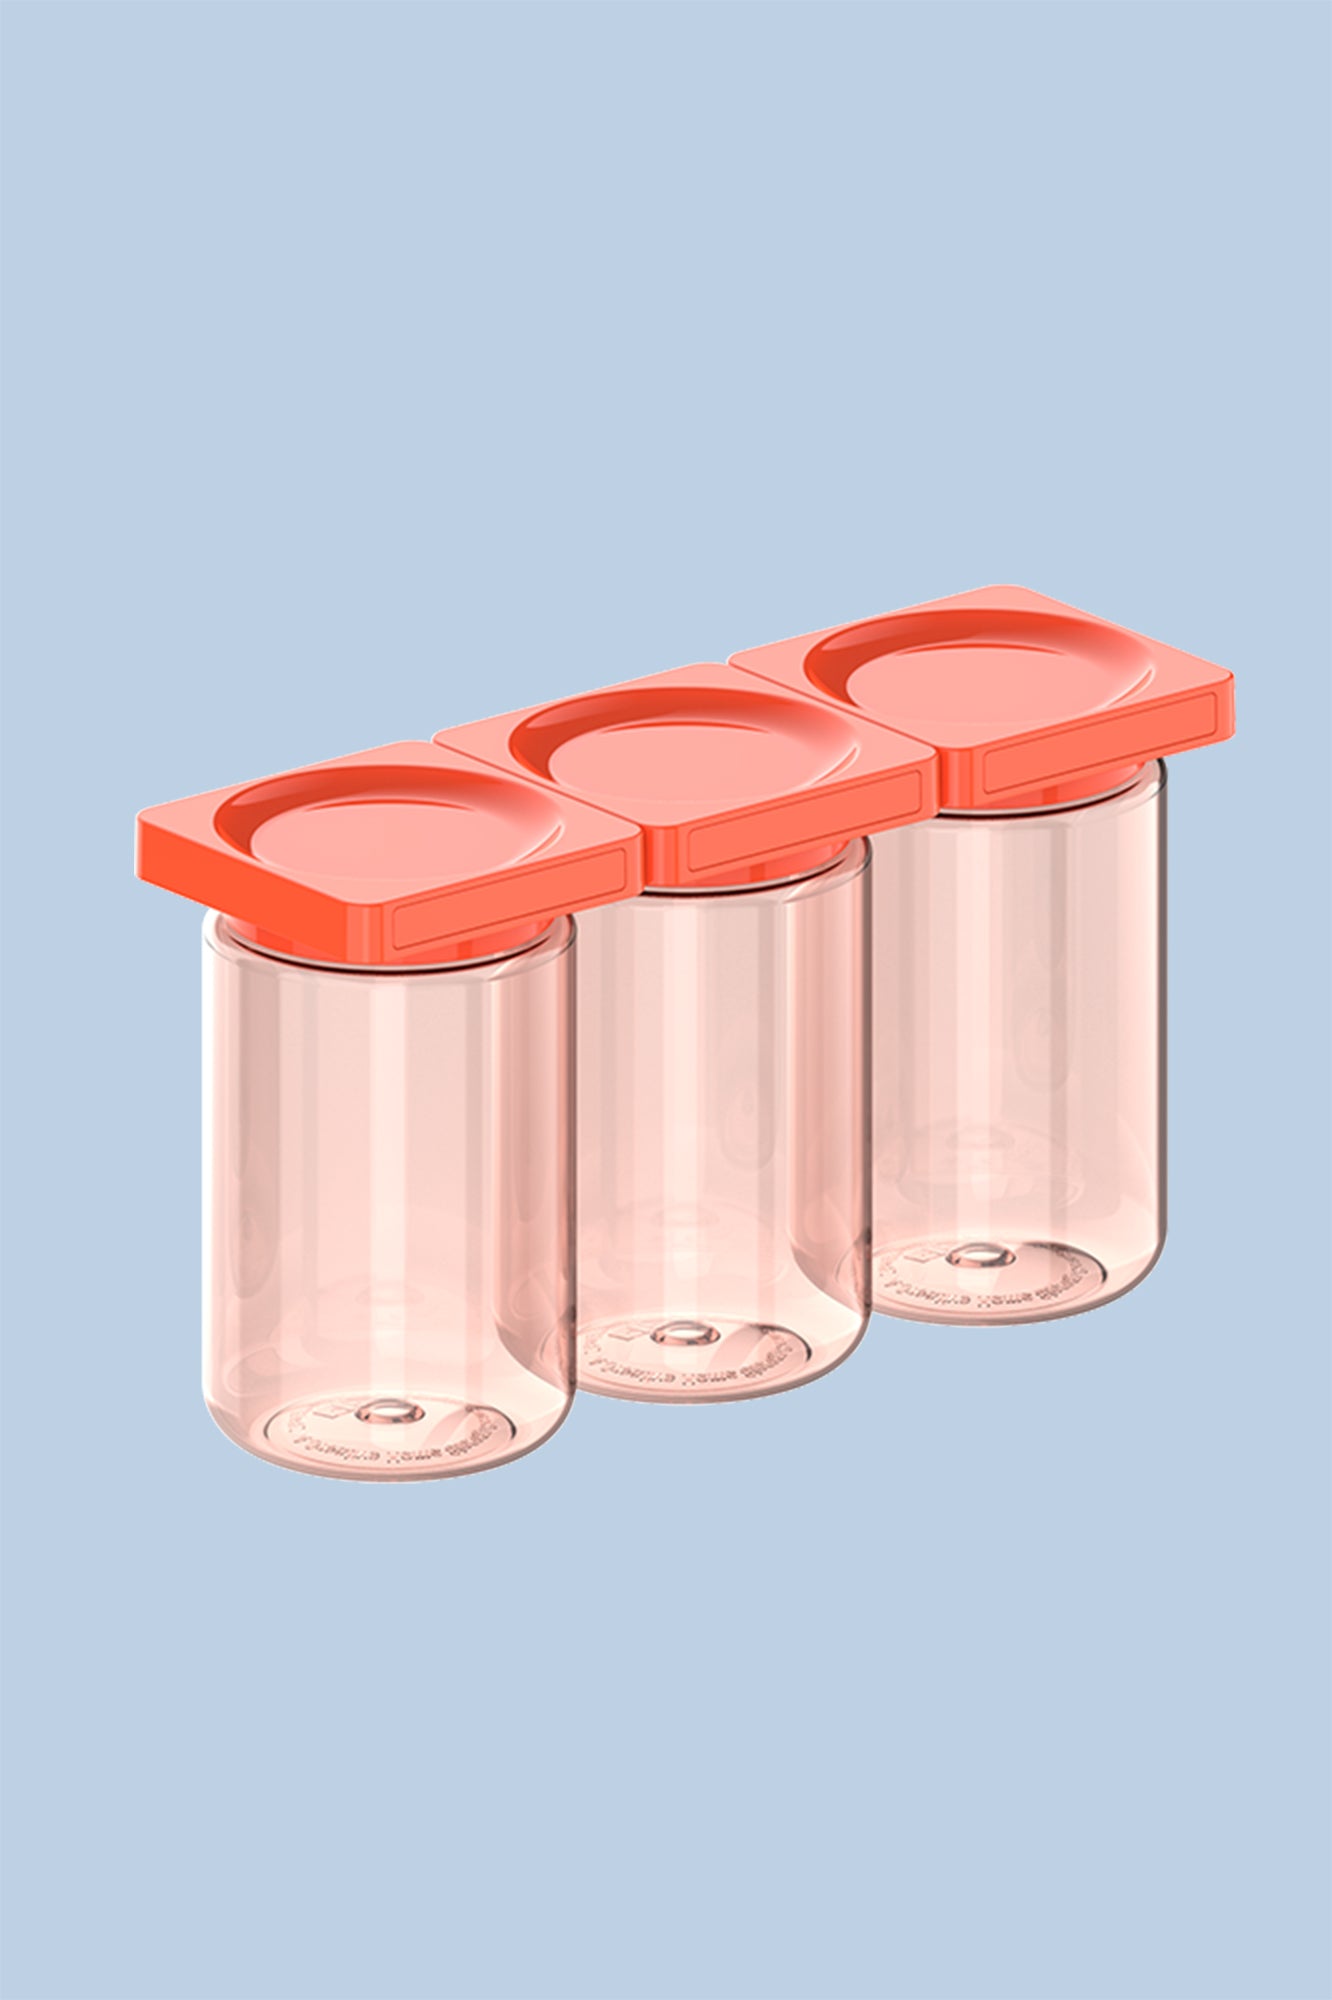 Medium 3-Pack Container by Cliik - Orange